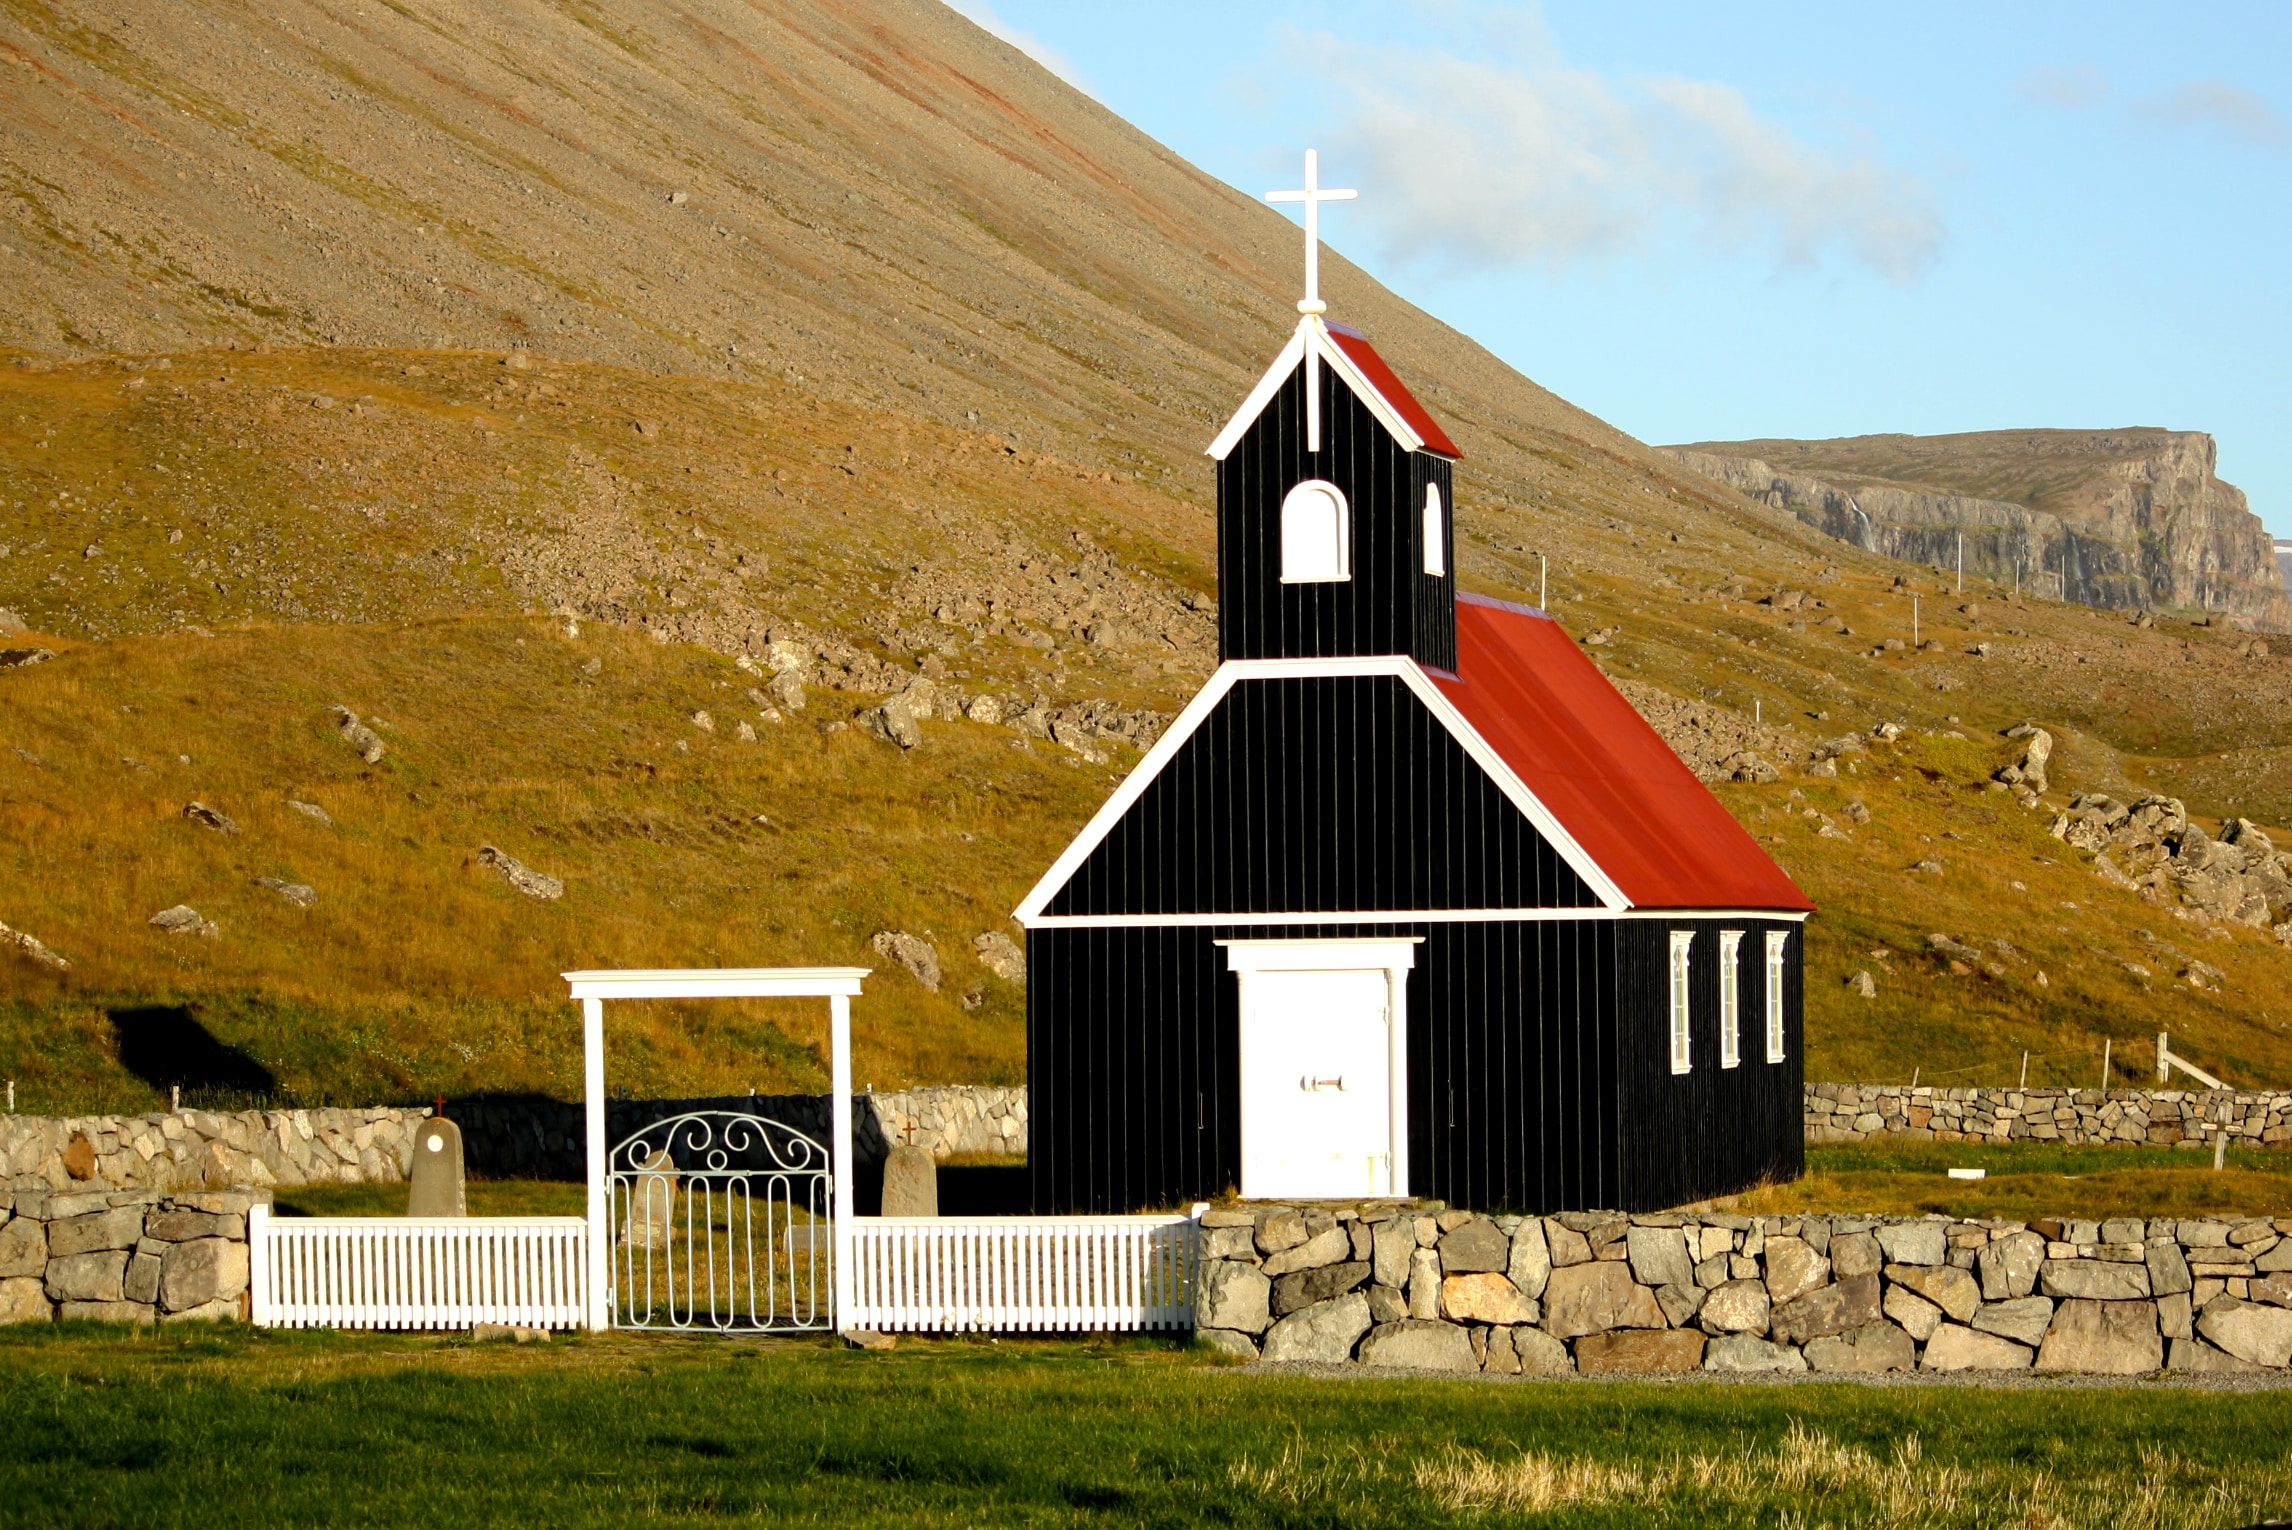 Small church by a hill